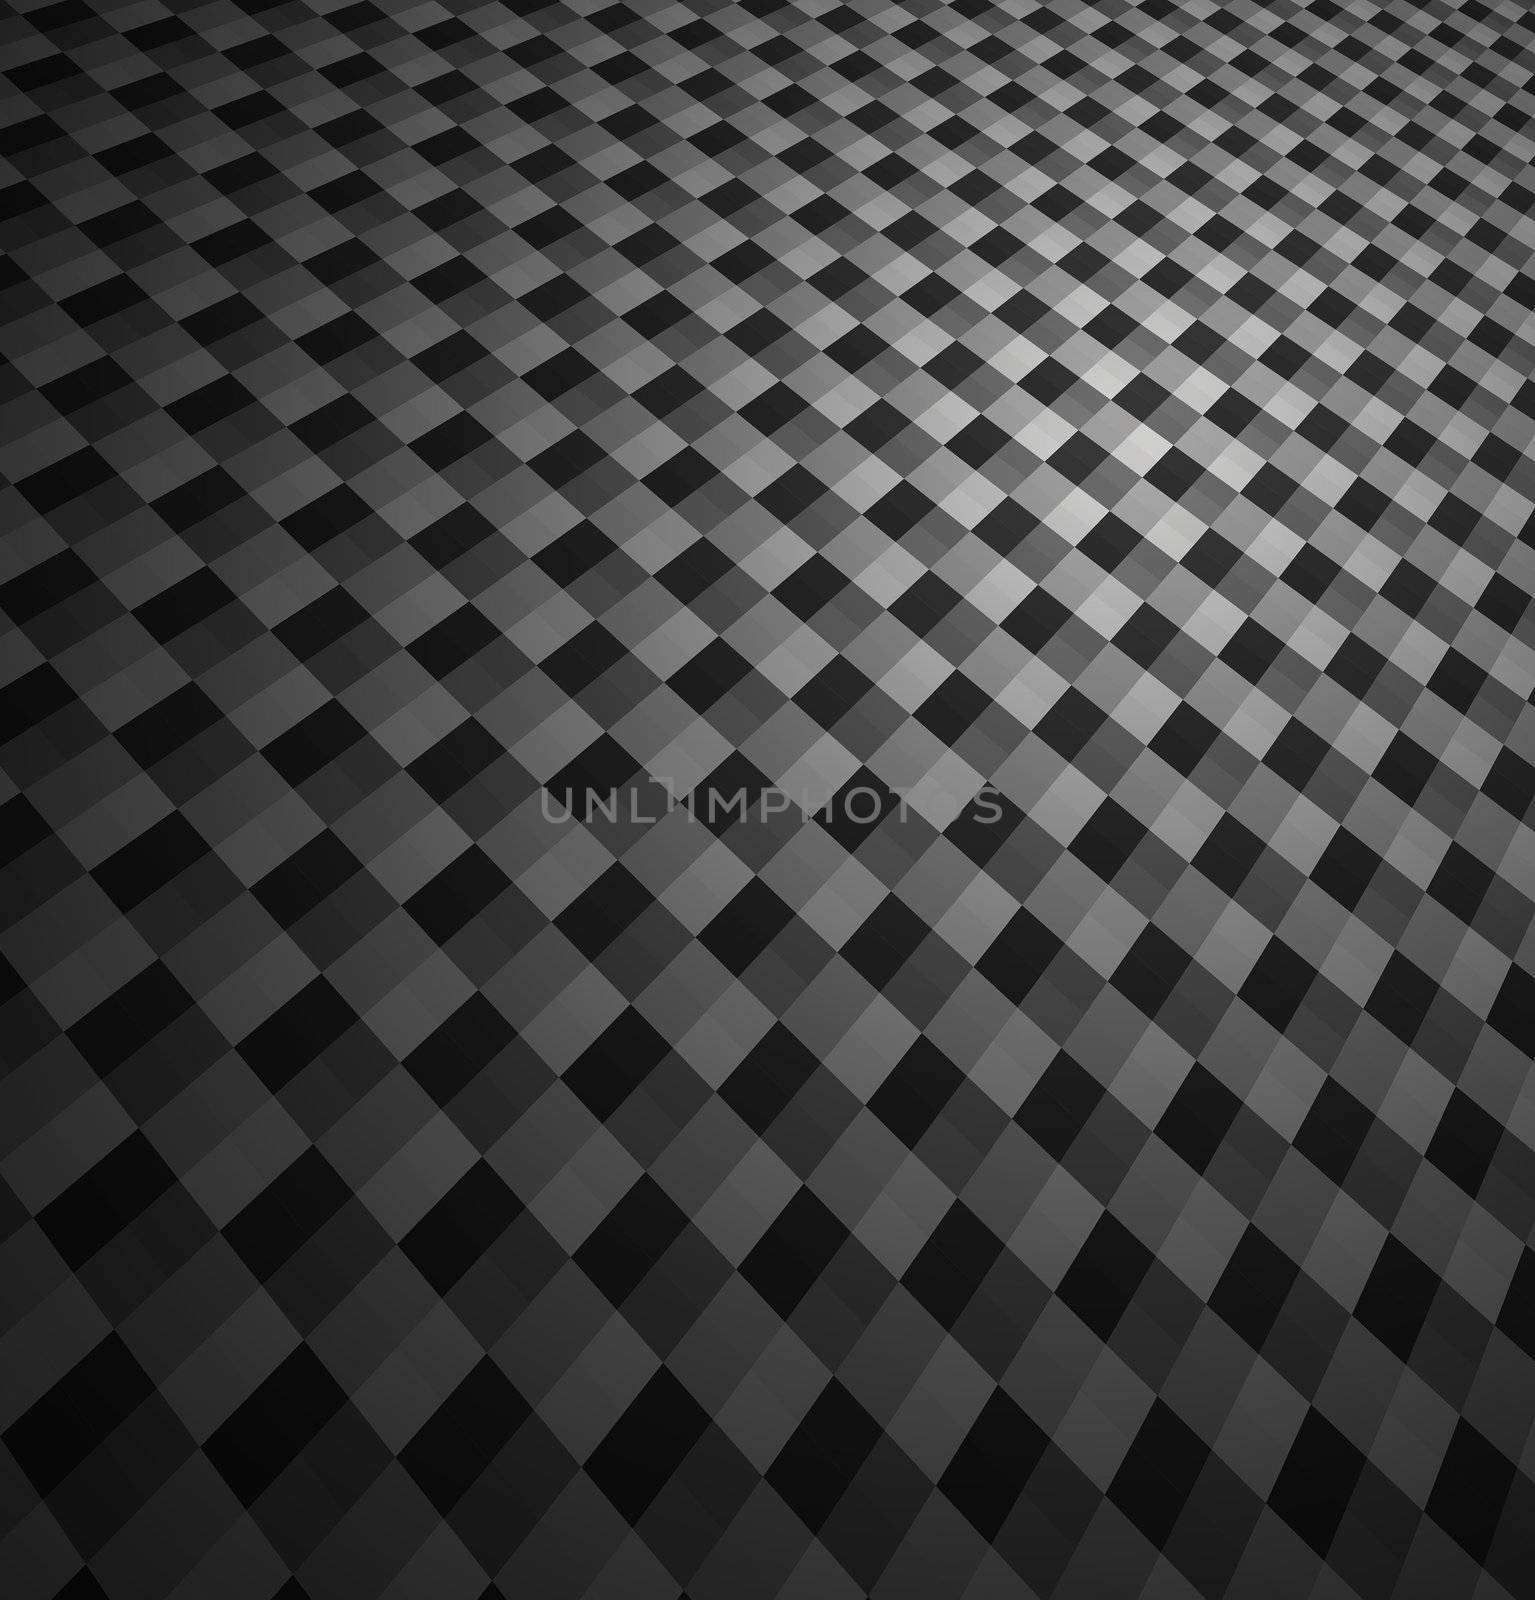 A great, high-res carbon fiber texture that you can apply in both print and web design.